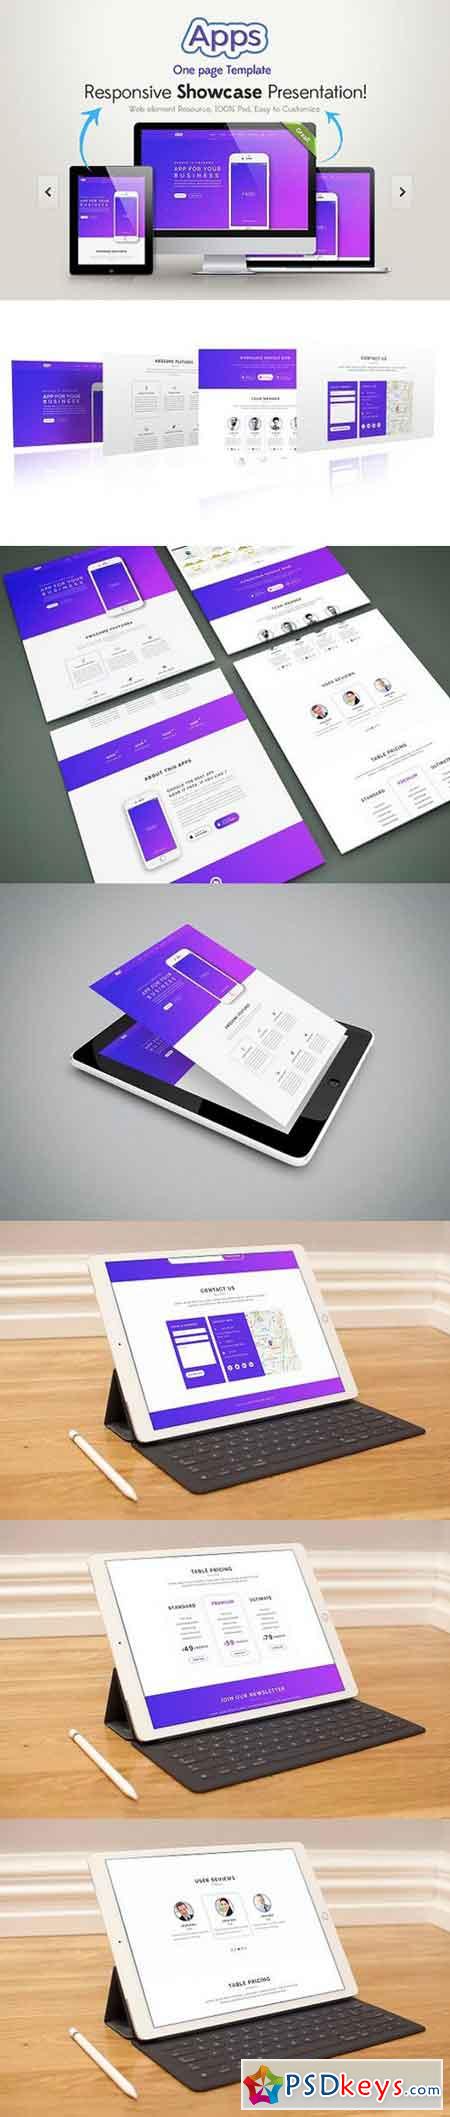 Apps Landing Page PSD Template 1301490